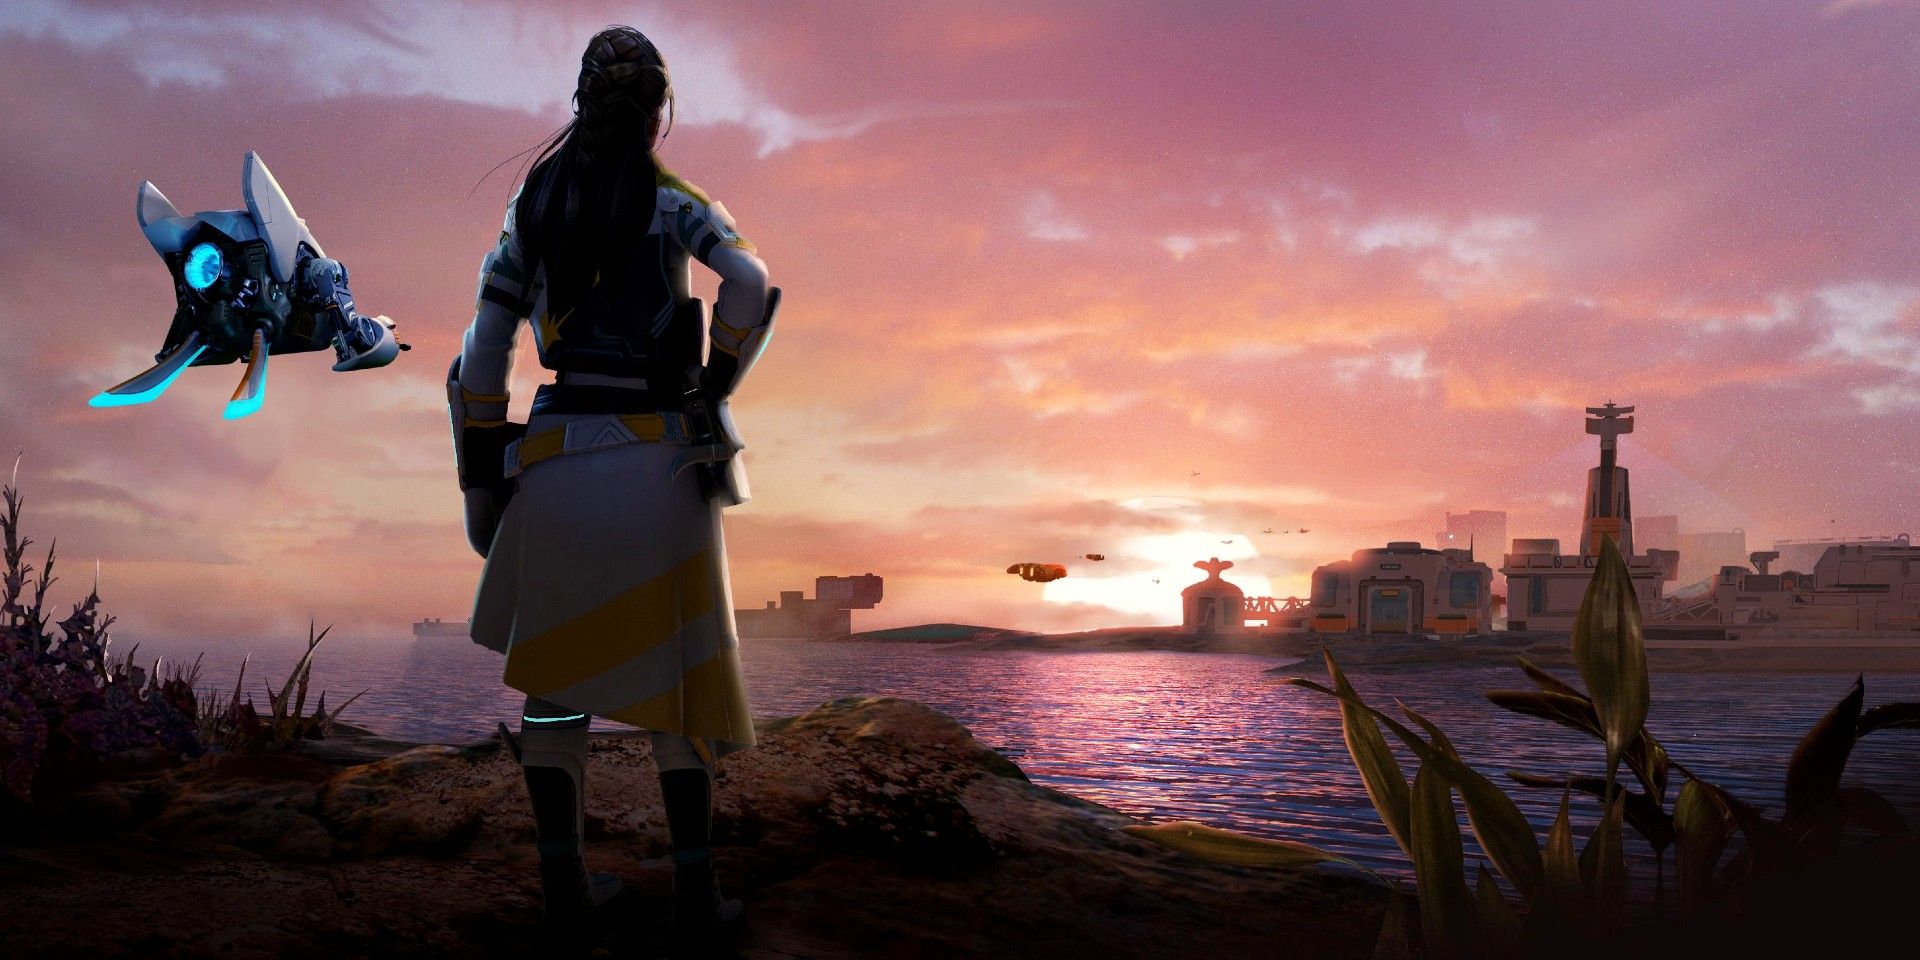 Cygnus Enterprises protagonist staring at a sunset and futuristic building with a flying silver robot by her side.